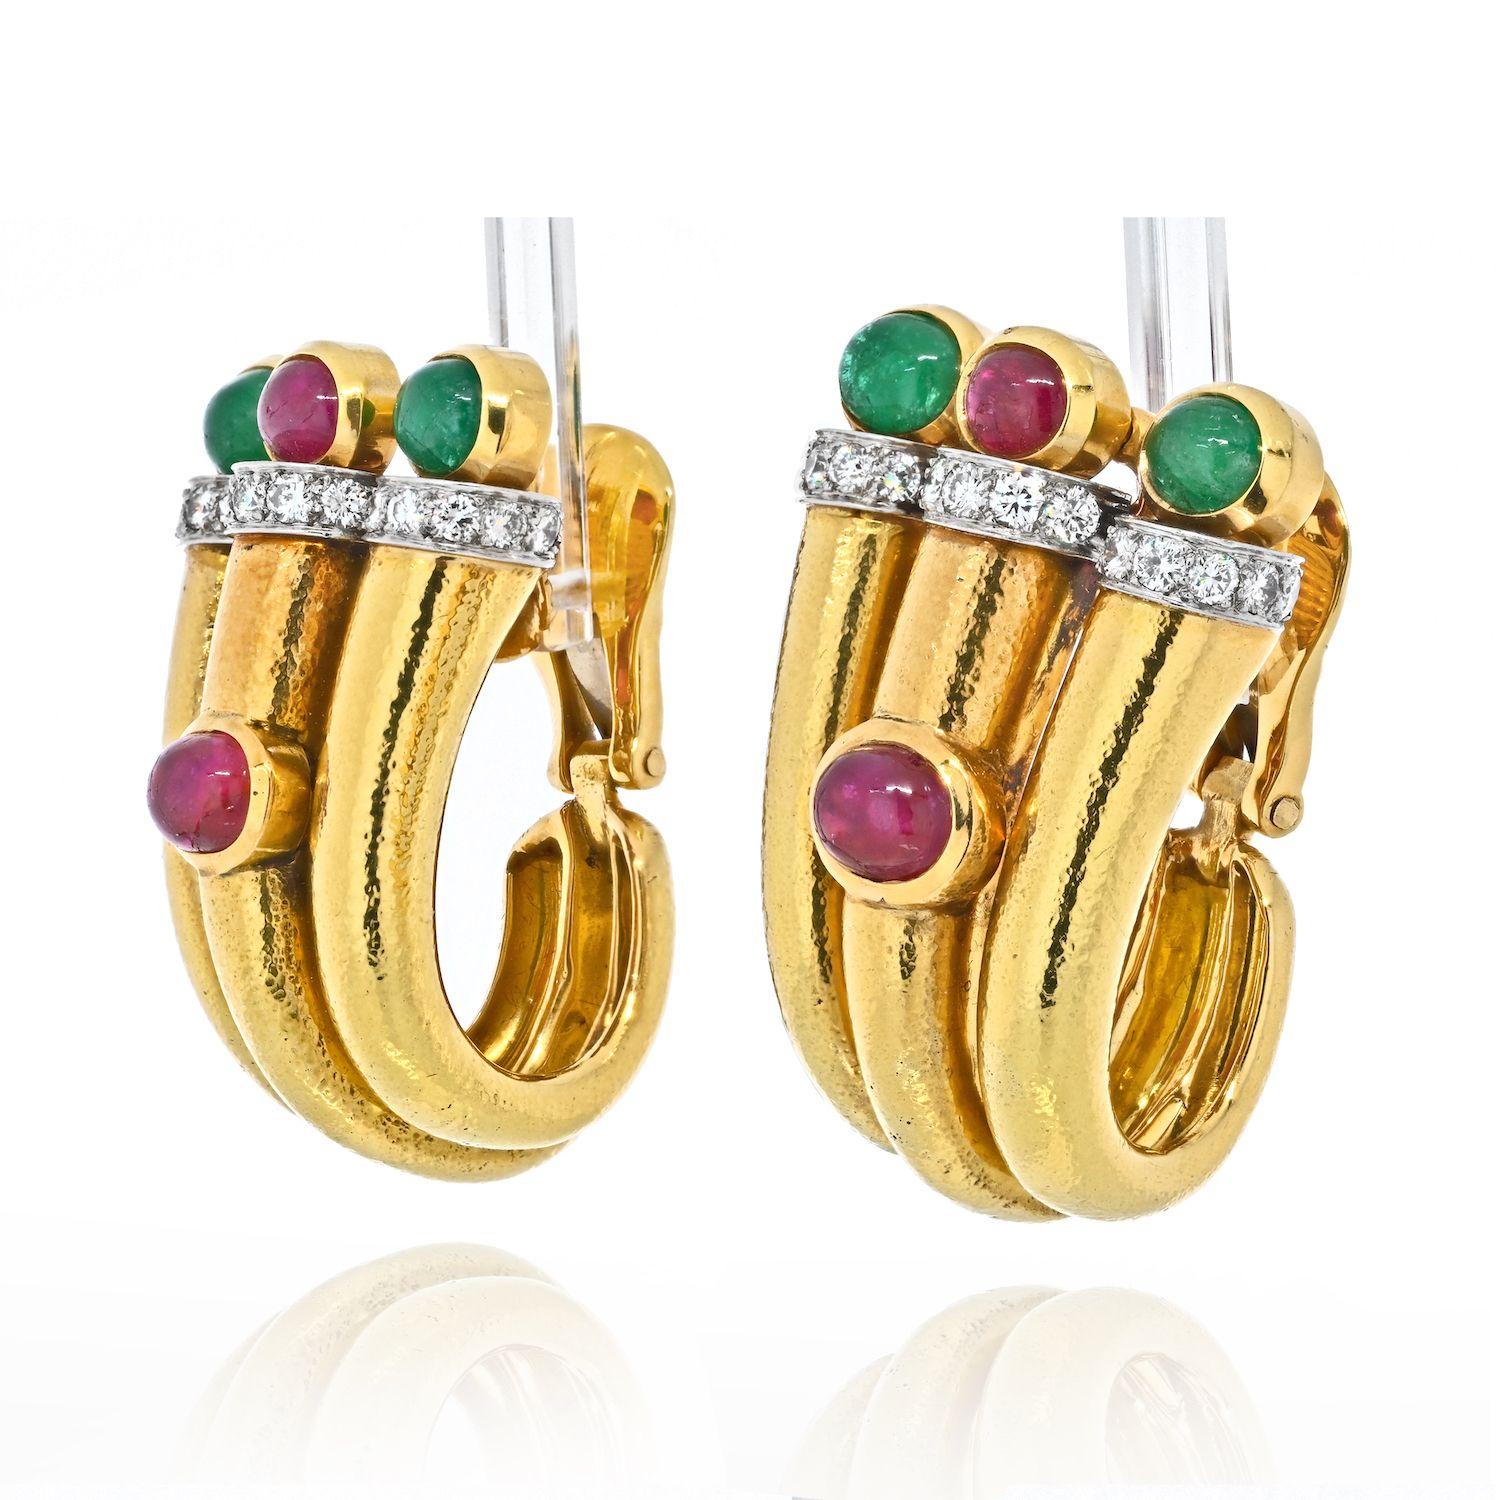 A stunning and rich look, these bold statement earrings by David Webb are of hand hammered 18K gold set with simply framed cabochon rubies and emeralds, then highlighted with diamonds, in a flattering shape that wraps under the earlobe. Clip and